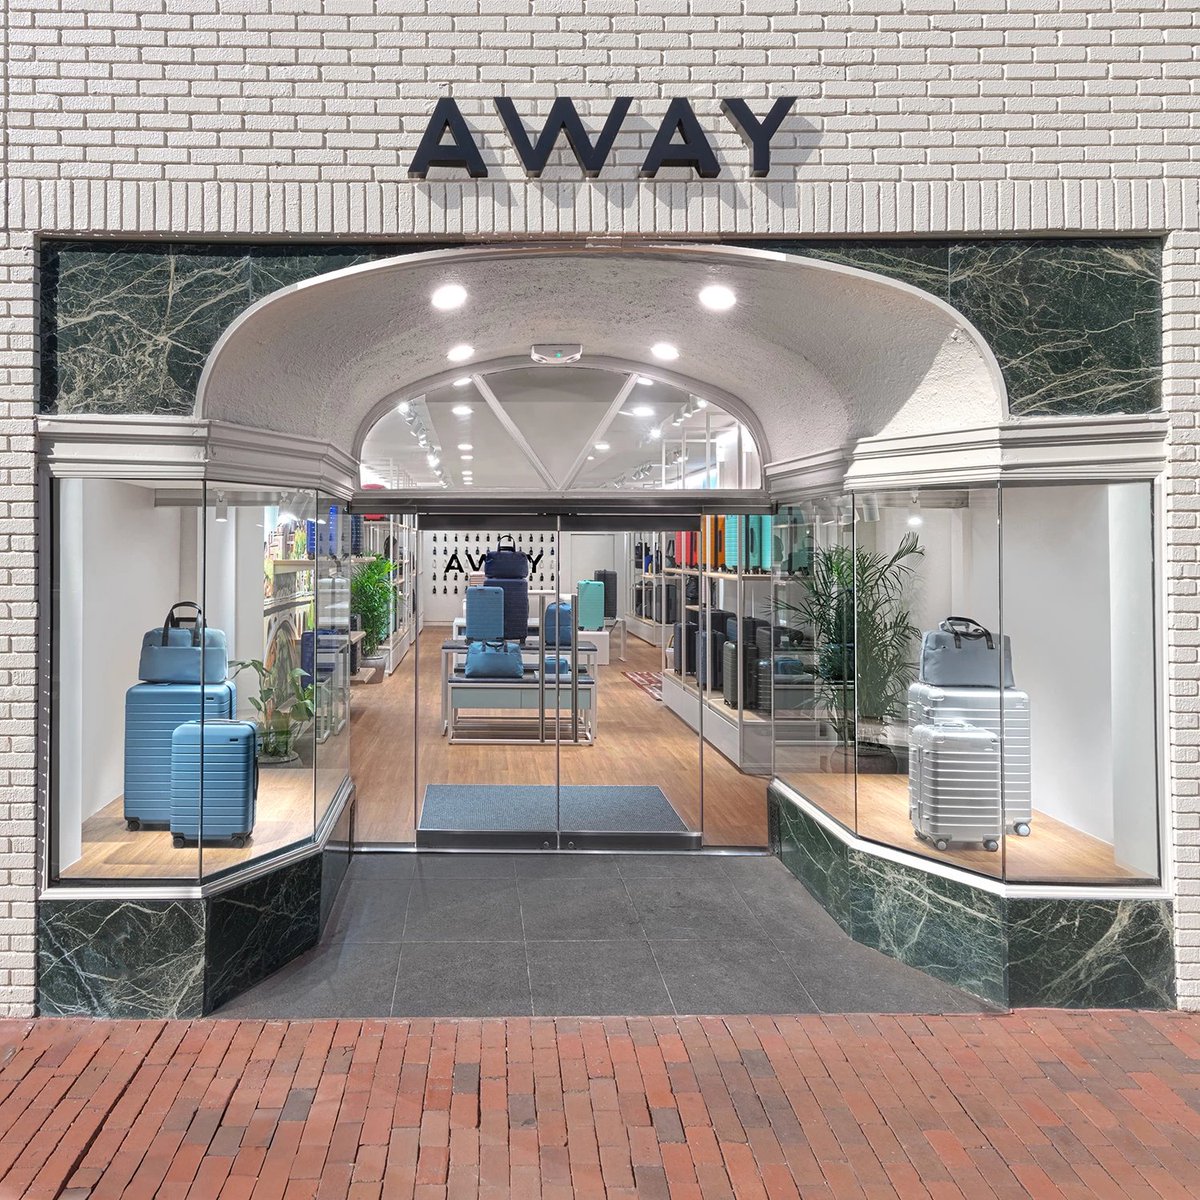 Just touched down in Georgetown. To celebrate, we’re giving away custom gifts with select purchases through Sunday, October 15. Bonus: students get 10% off all purchases that include luggage.* See you there! *Terms apply. See link below bit.ly/away-georgetown